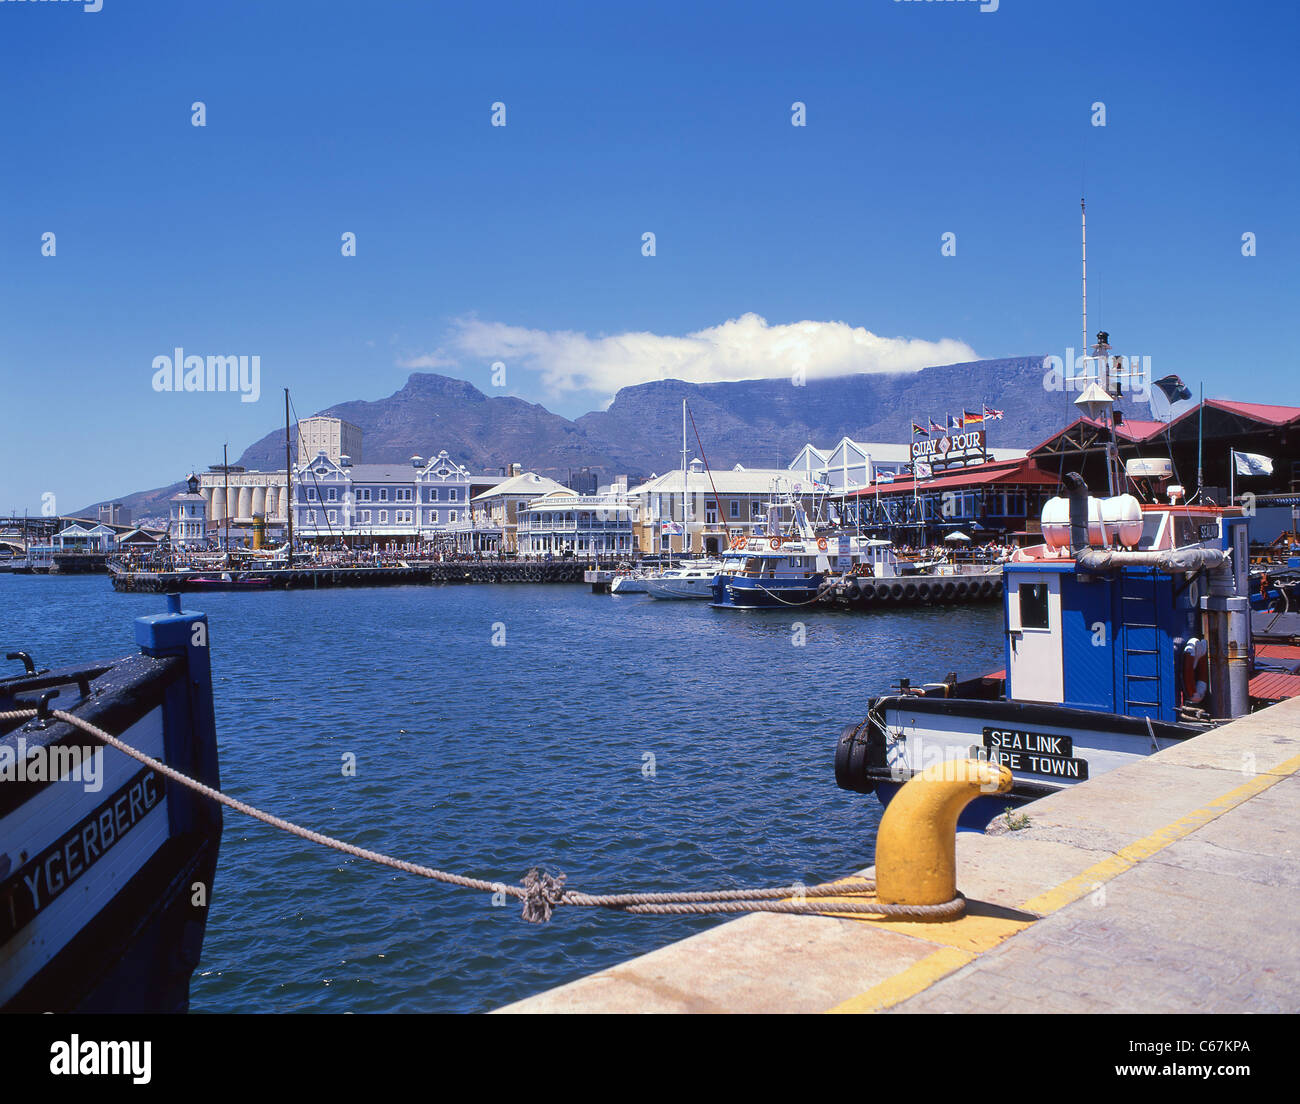 Victoria & Albert Waterfront showing Table Mountain, Cape Town, Western Cape, Republic of South Africa Stock Photo